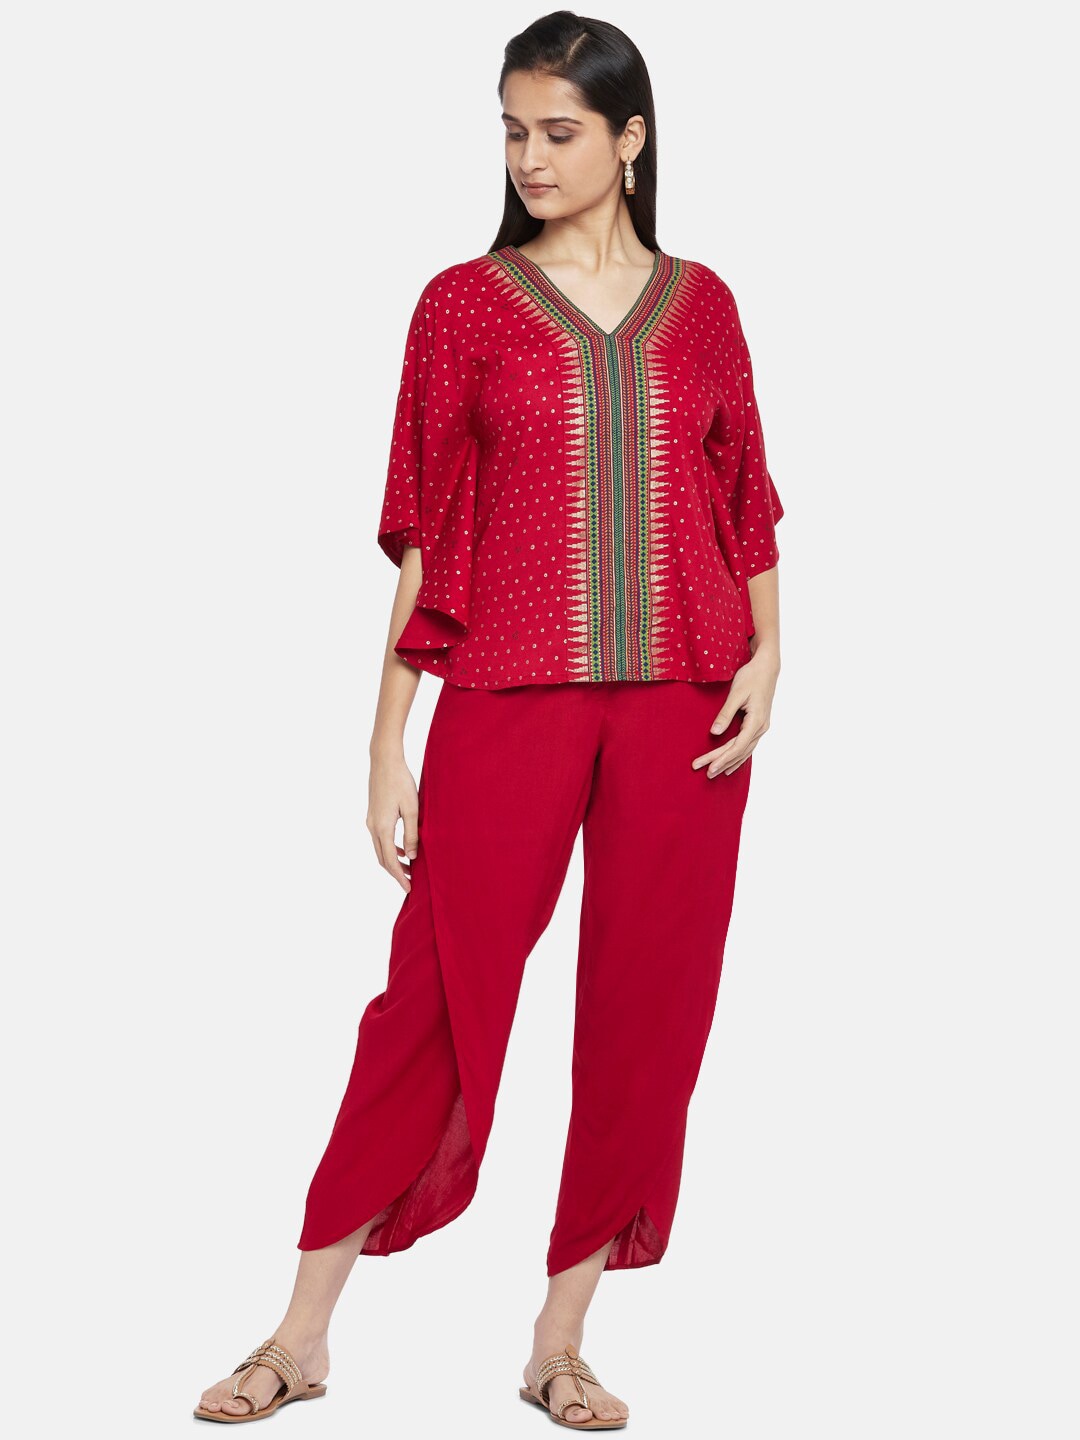 AKKRITI BY PANTALOONS Maroon Kaftan Top with Trousers Price in India